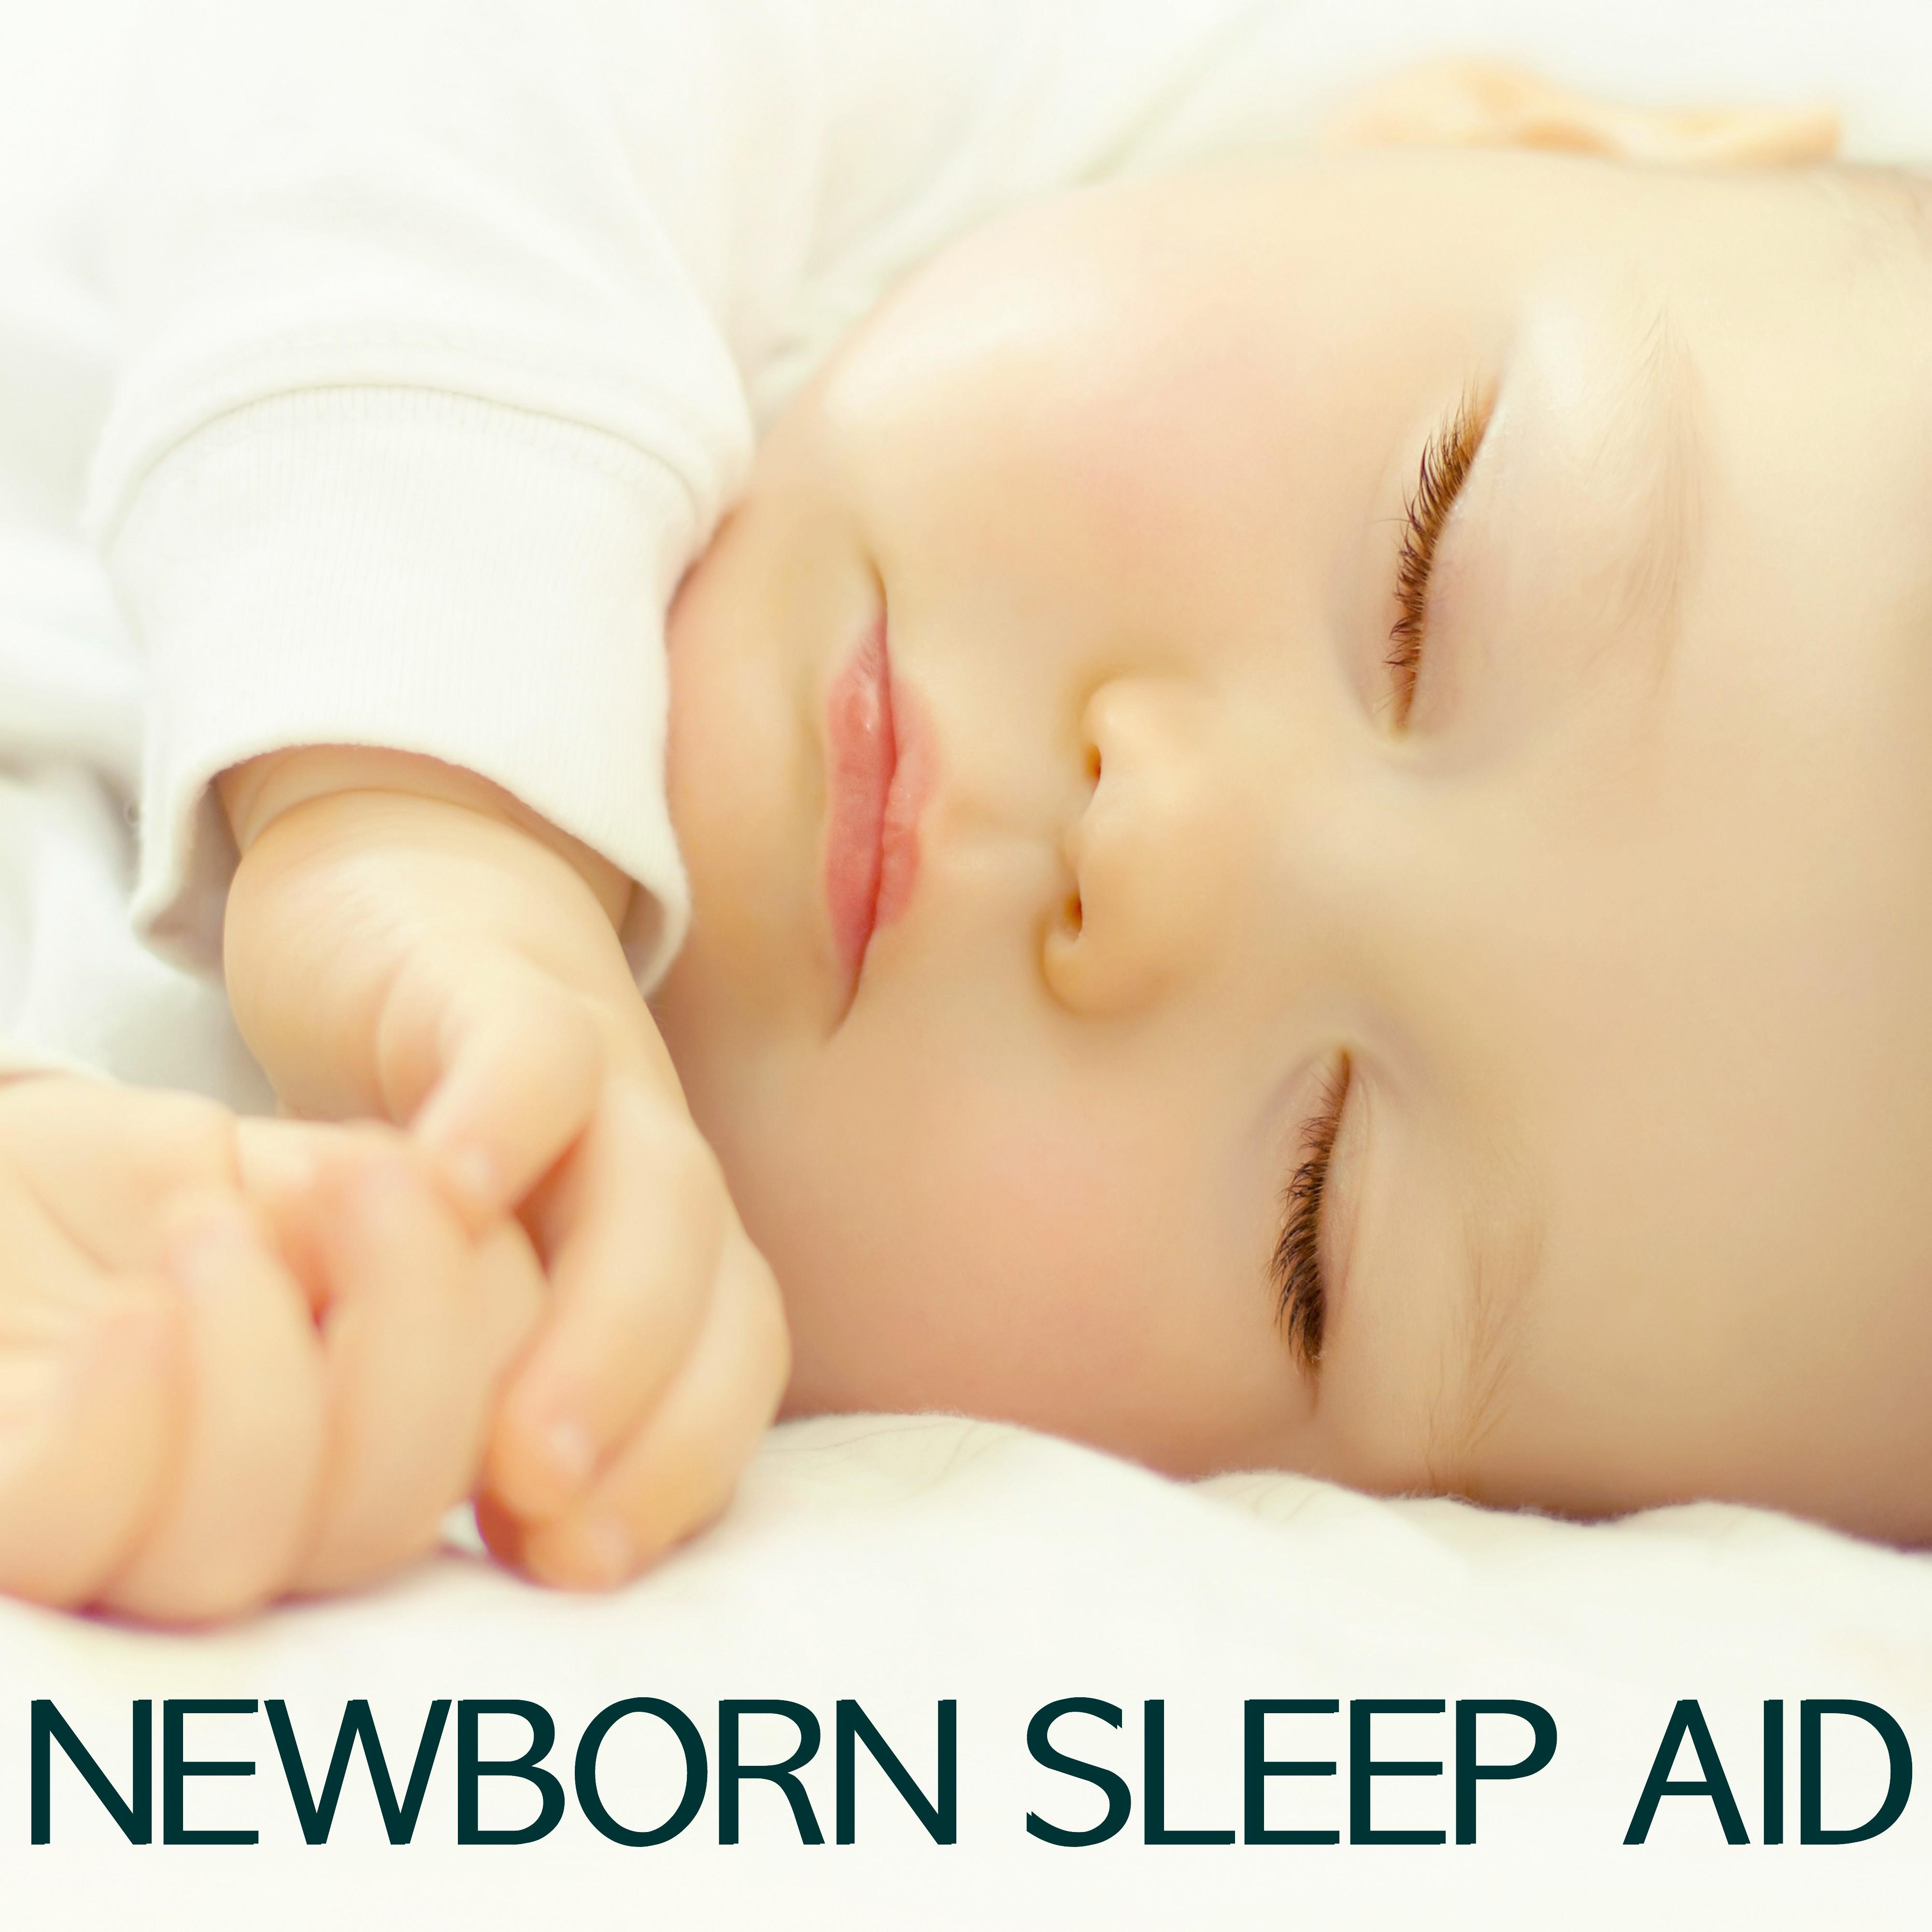 Newborn Sleep Aid - Best Relaxing Music for Bedtime Baby, Water & Wind Sounds to Help Baby and Mom Sleep Through the Night